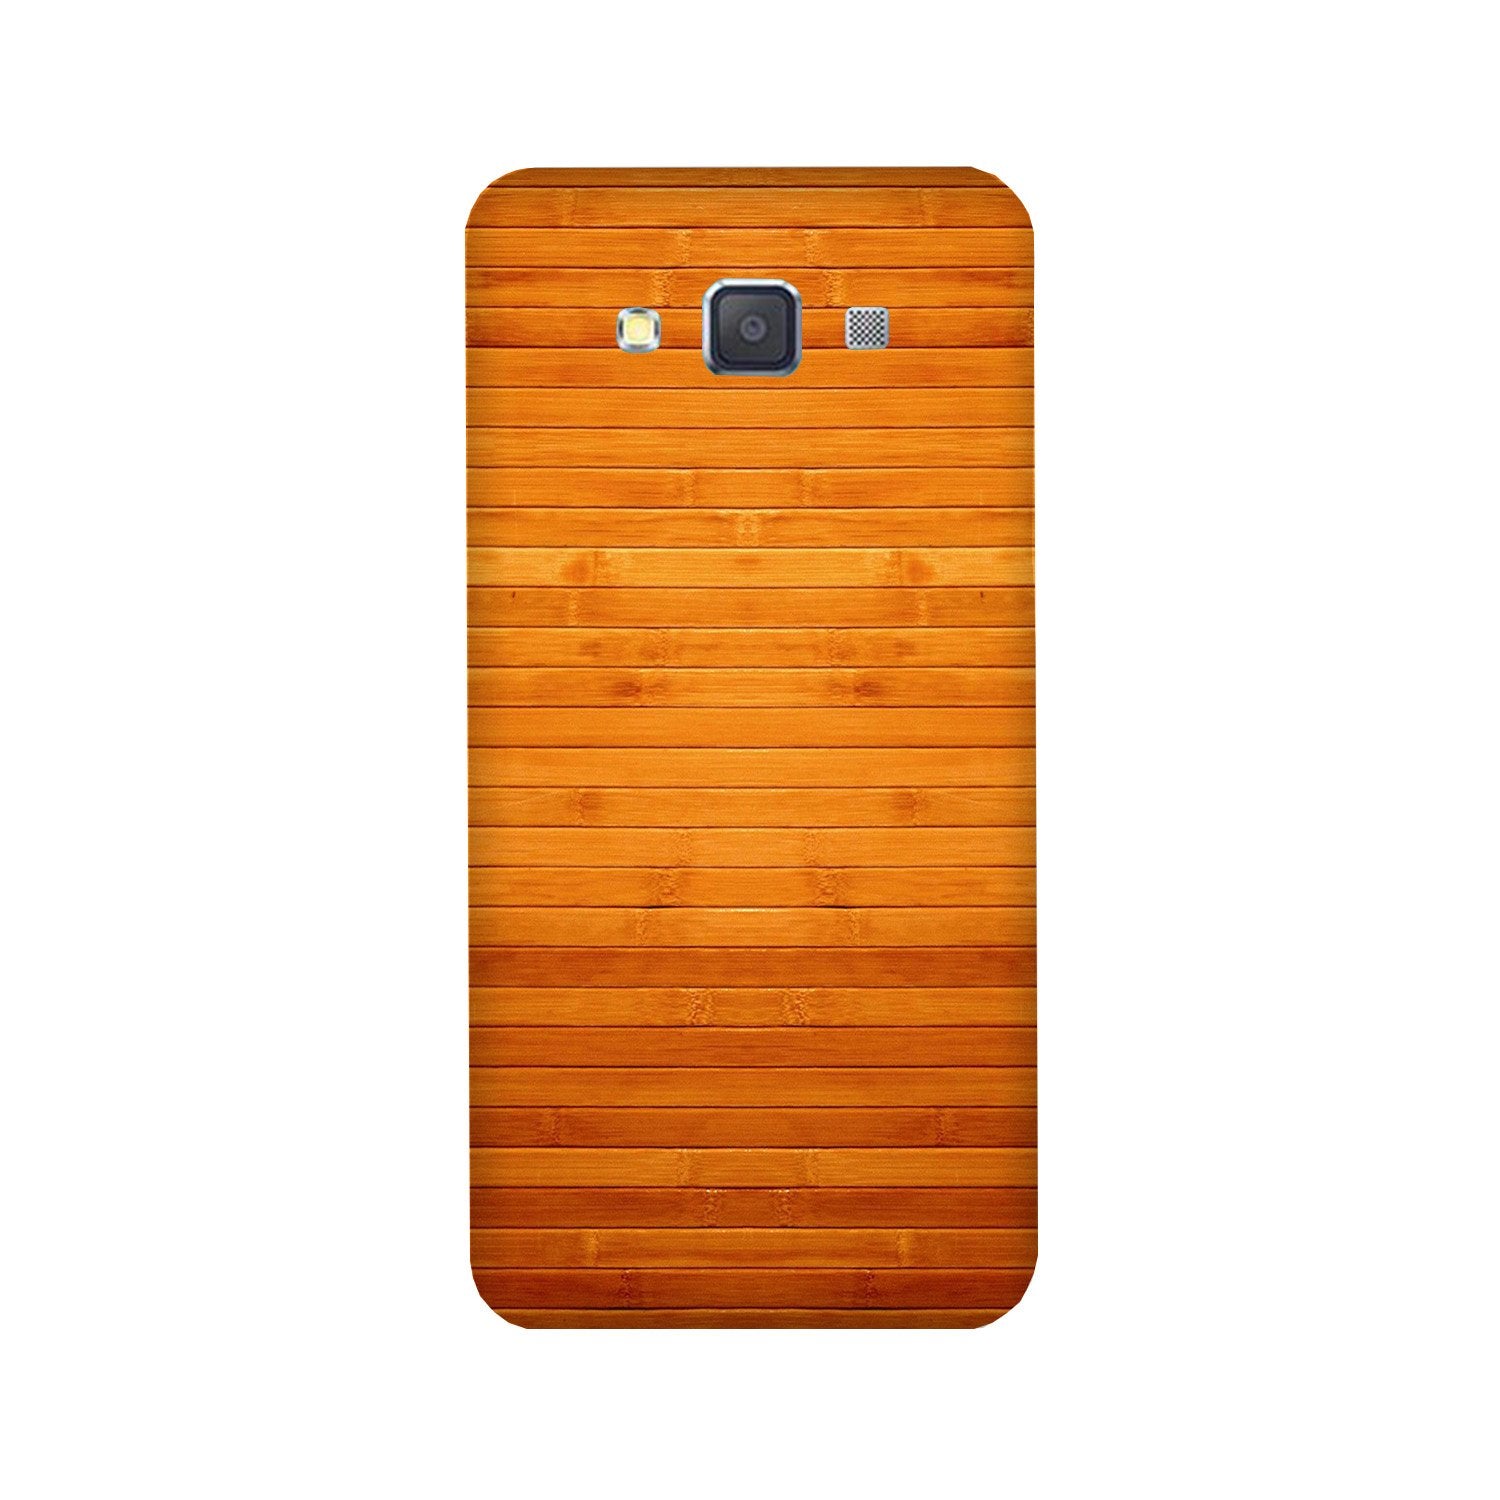 Wooden Look Case for Galaxy Grand 2(Design - 111)